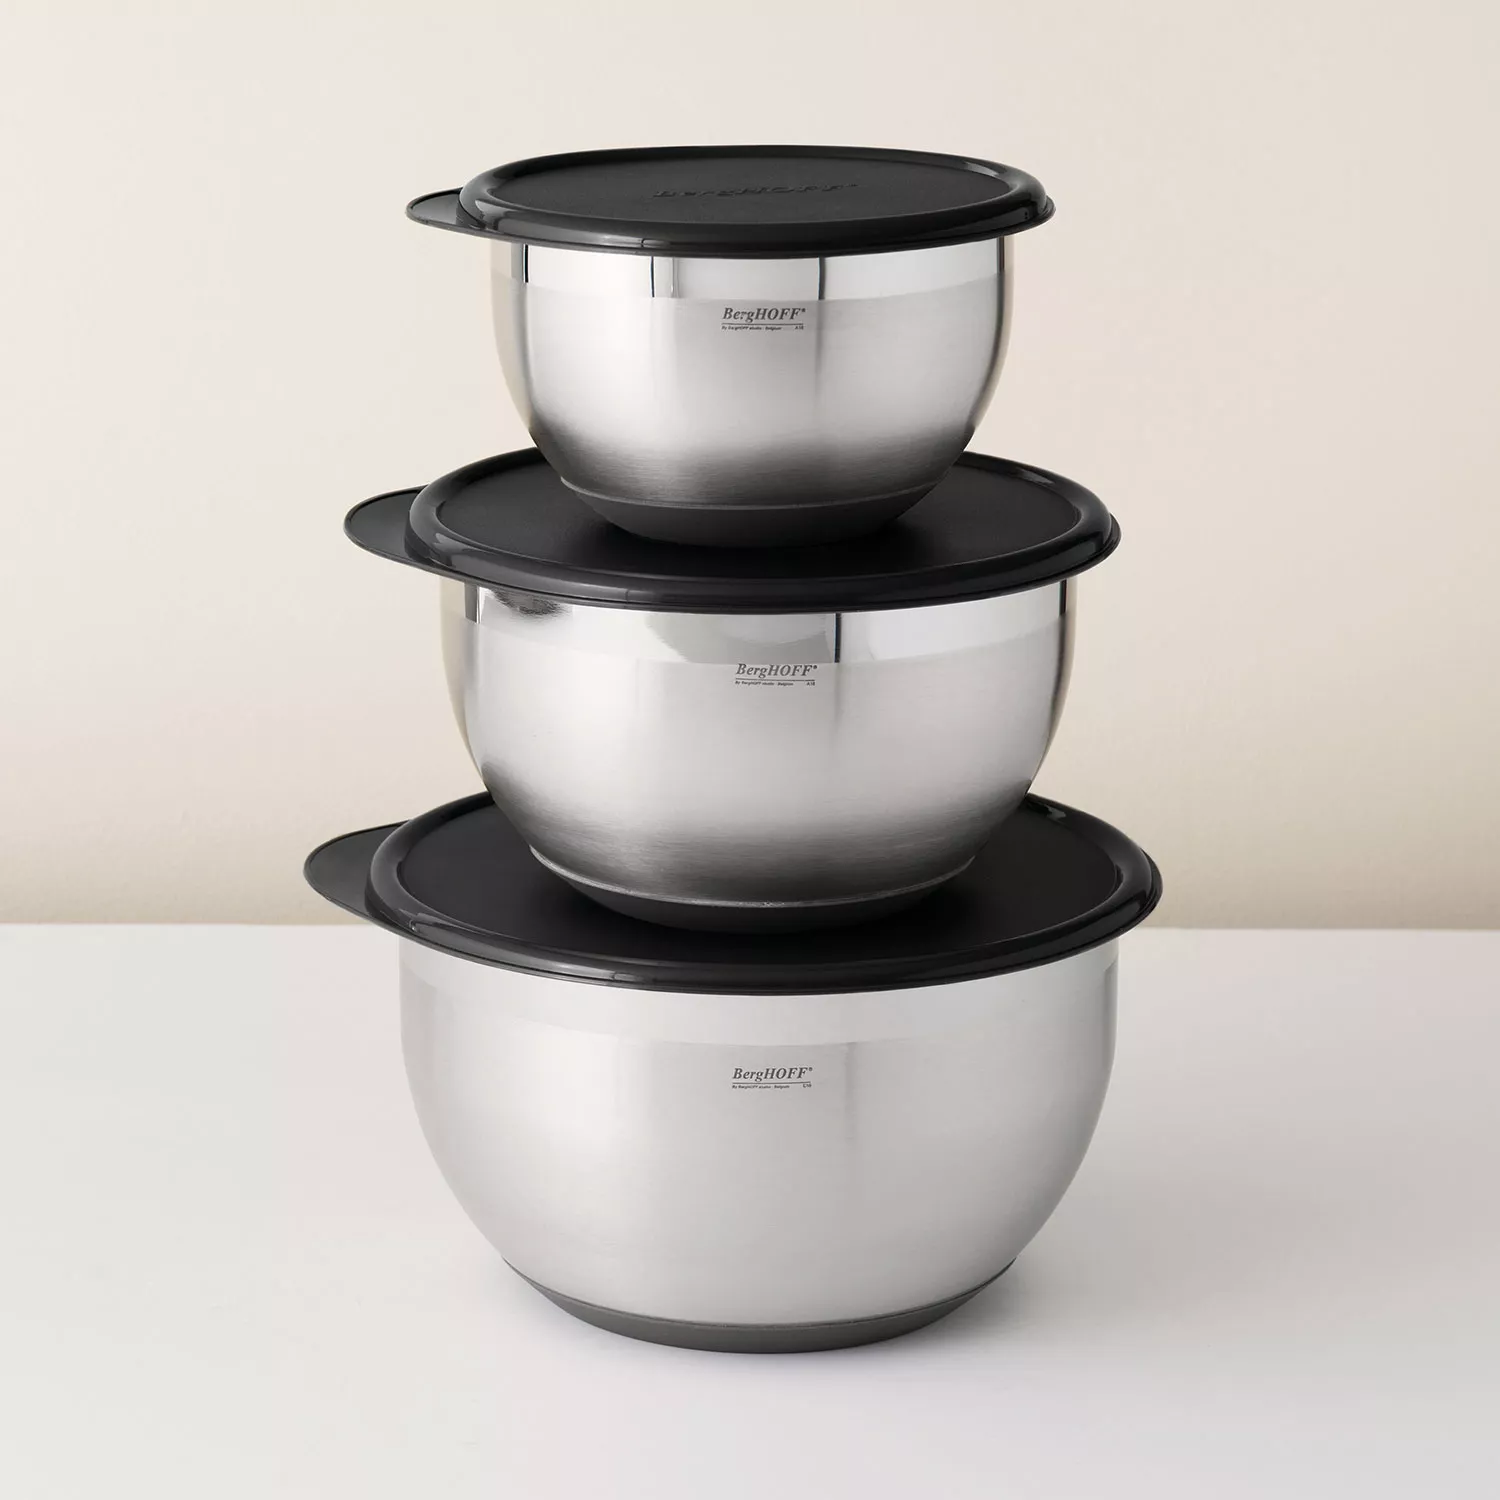 Cuisinart Set of 3 Stainless Steel Mixing Bowls with Lids 1 ct